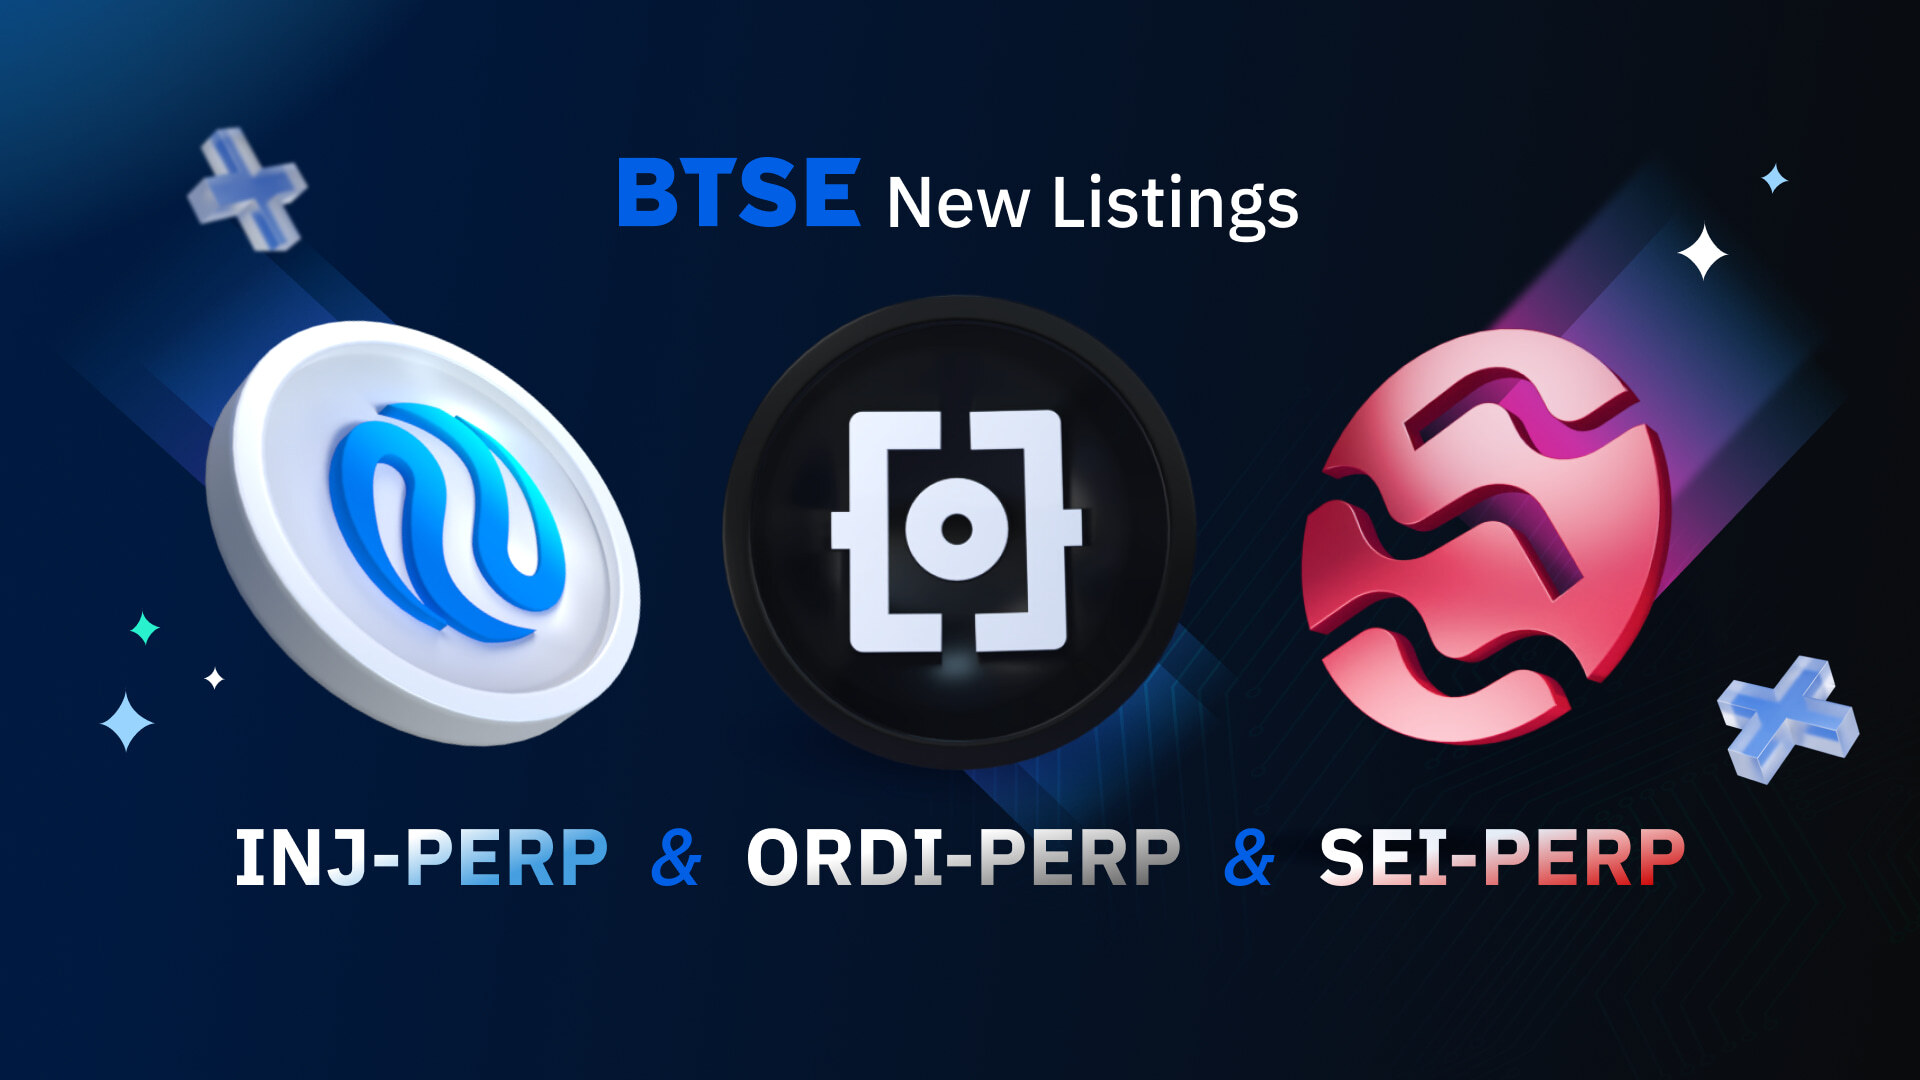 BTSE Lists INJ-PERP, ORDI-PERP, and SEI-PERP